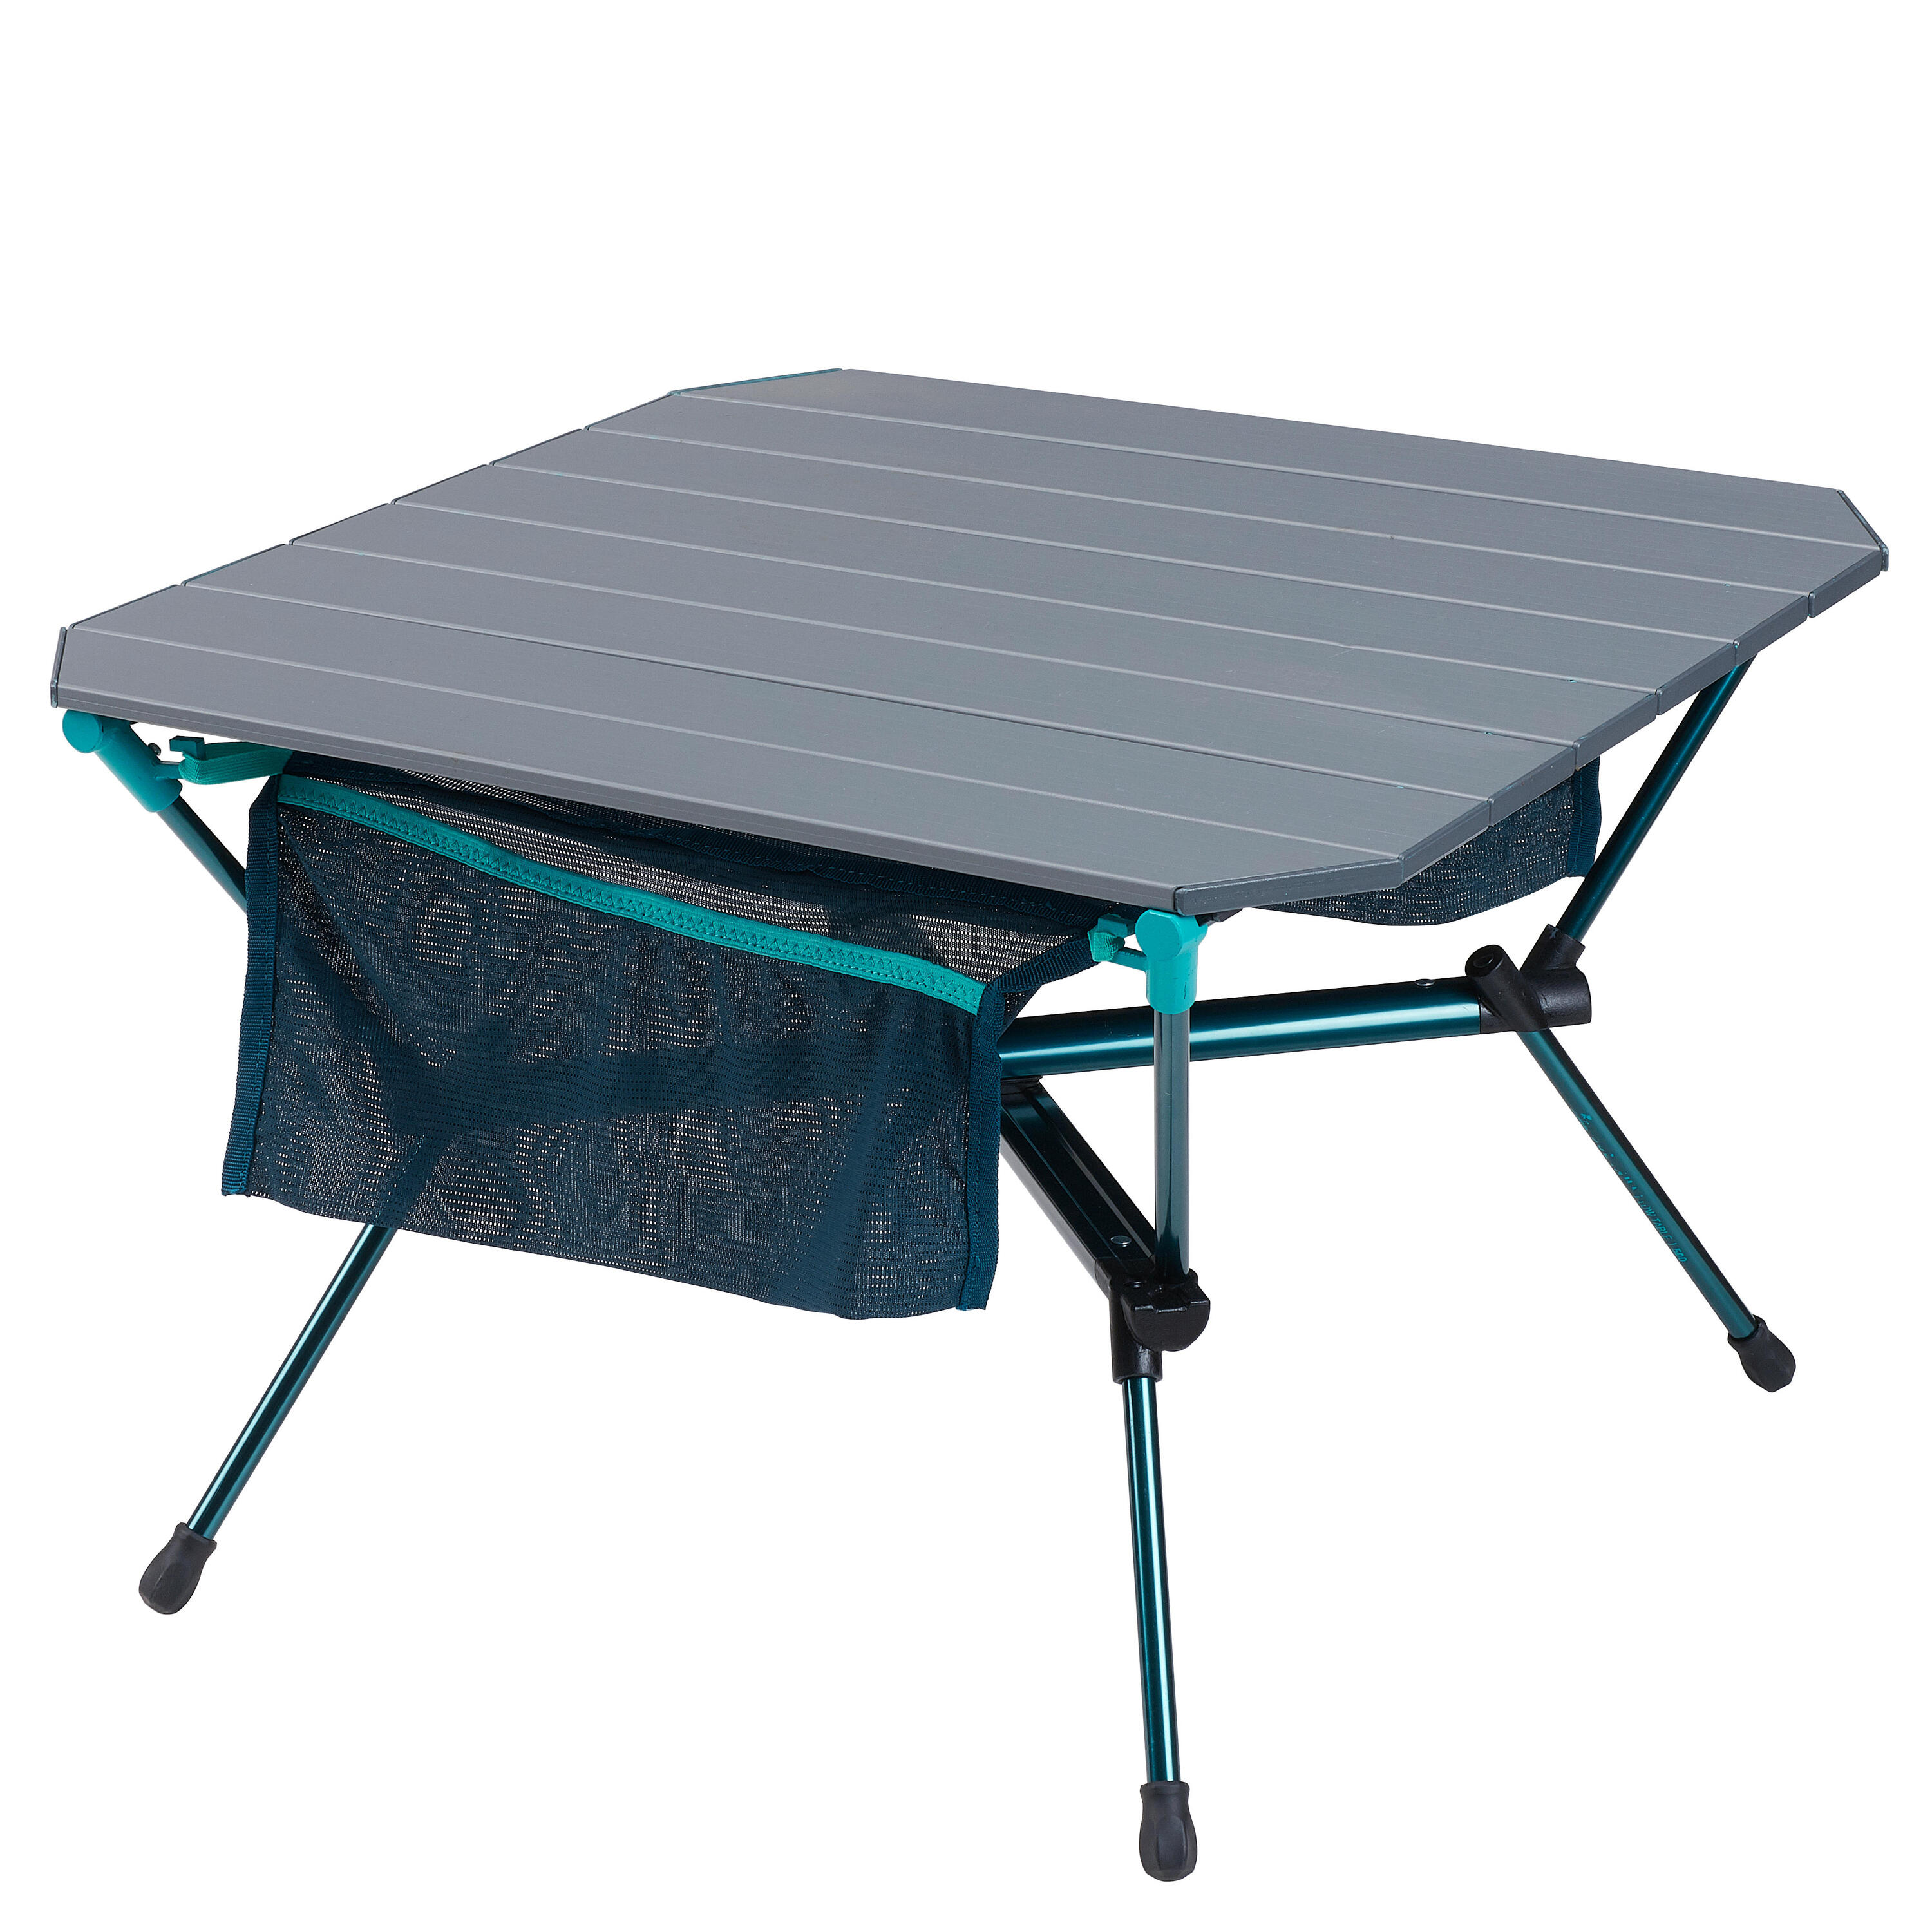 FOLDING CAMPING TABLE - MH500 9/10